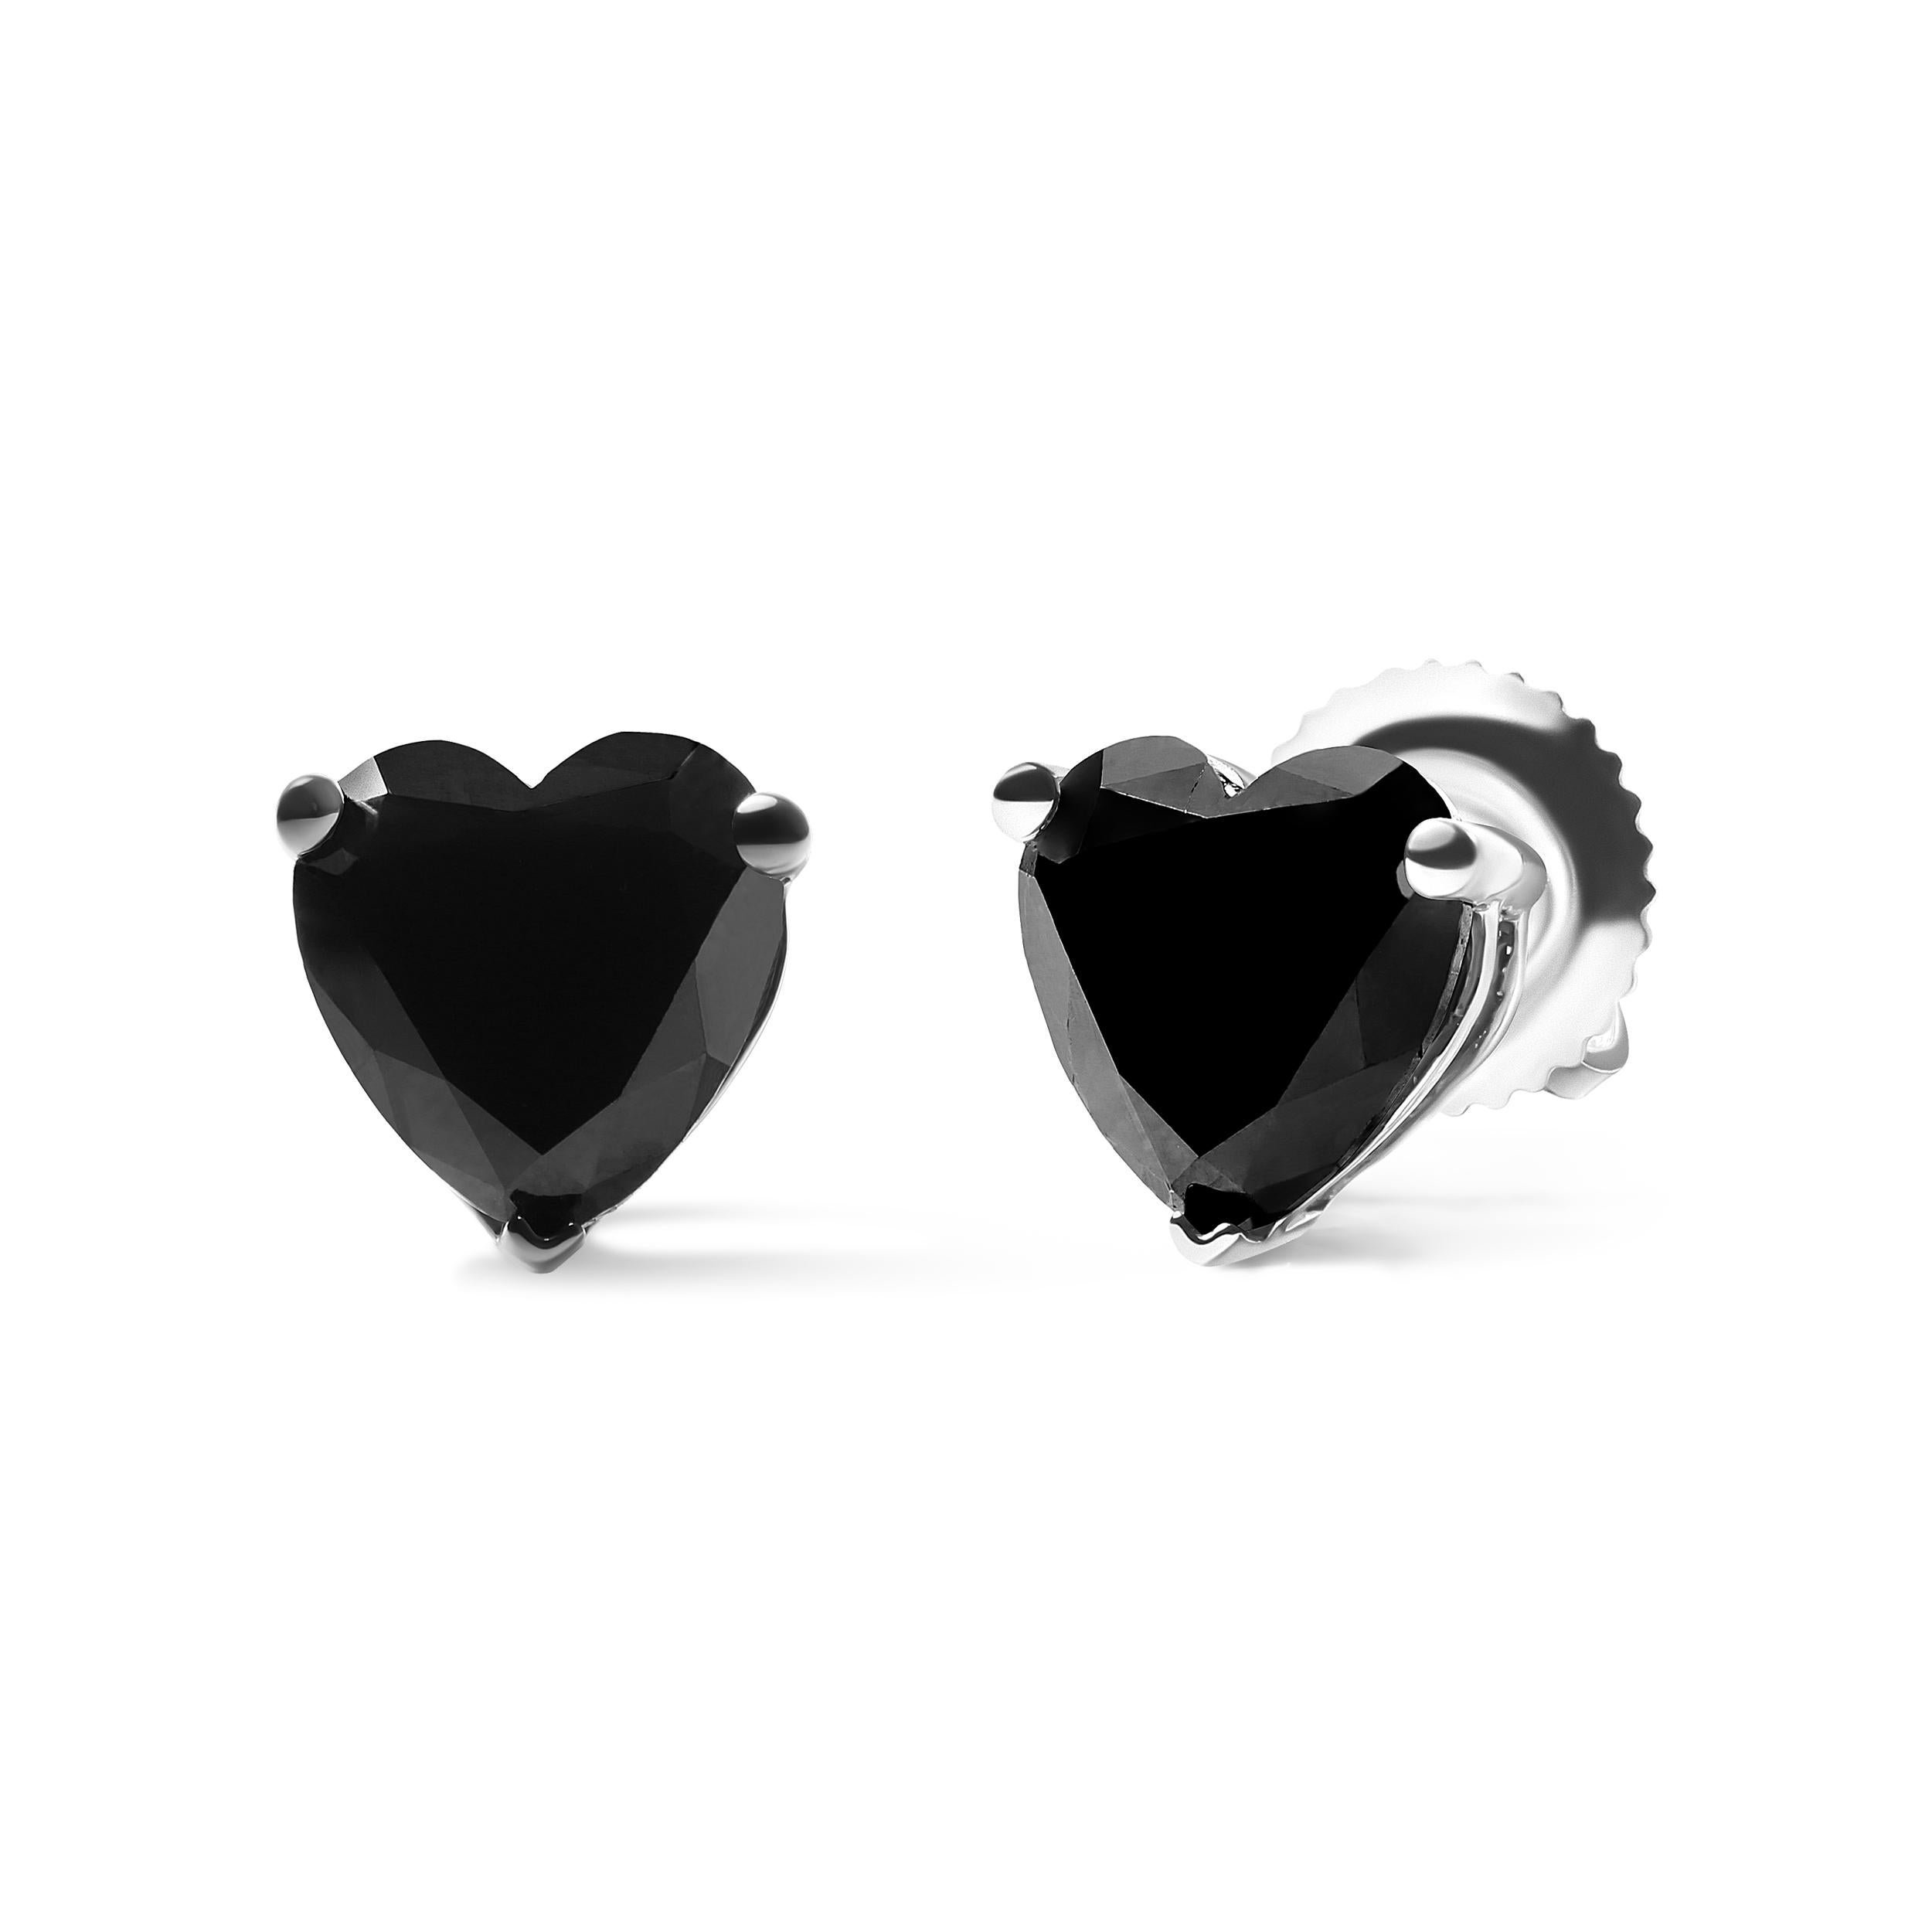 Indulge in the timeless elegance of 14K white gold with these stunning black heart shaped diamond solitaire stud earrings. The intricate design features two magnificent black diamonds, each weighing 1.0 carats total of 2.0 carats and framed by a